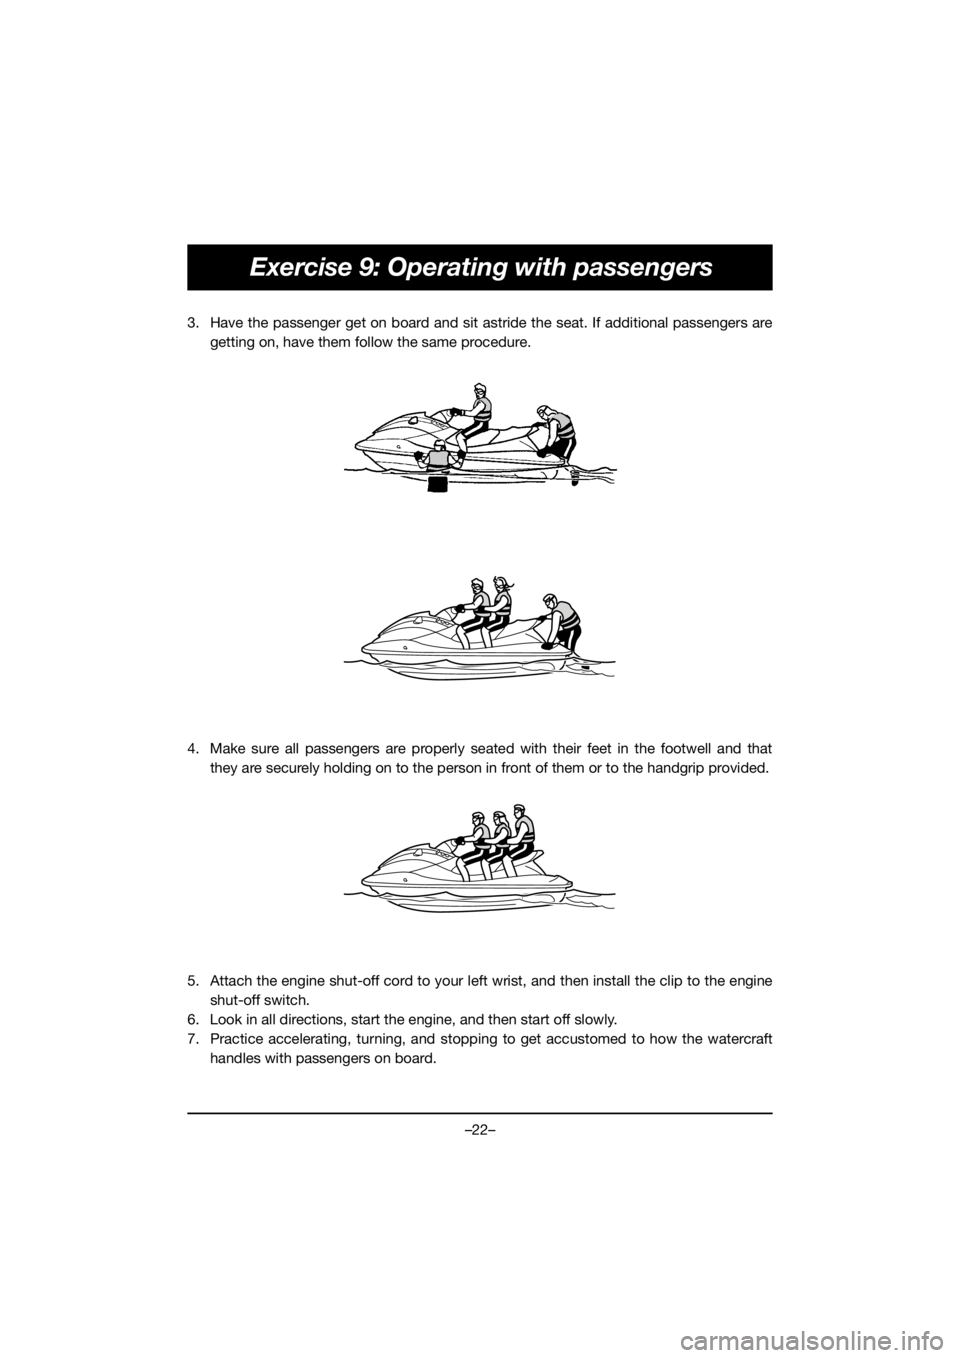 YAMAHA EX 2021  Manuale duso (in Italian) –22–
Exercise 9: Operating with passengers
3. Have the passenger get on board and sit astride the seat. If additional passengers aregetting on, have them follow the same procedure. 
4. Make sure a